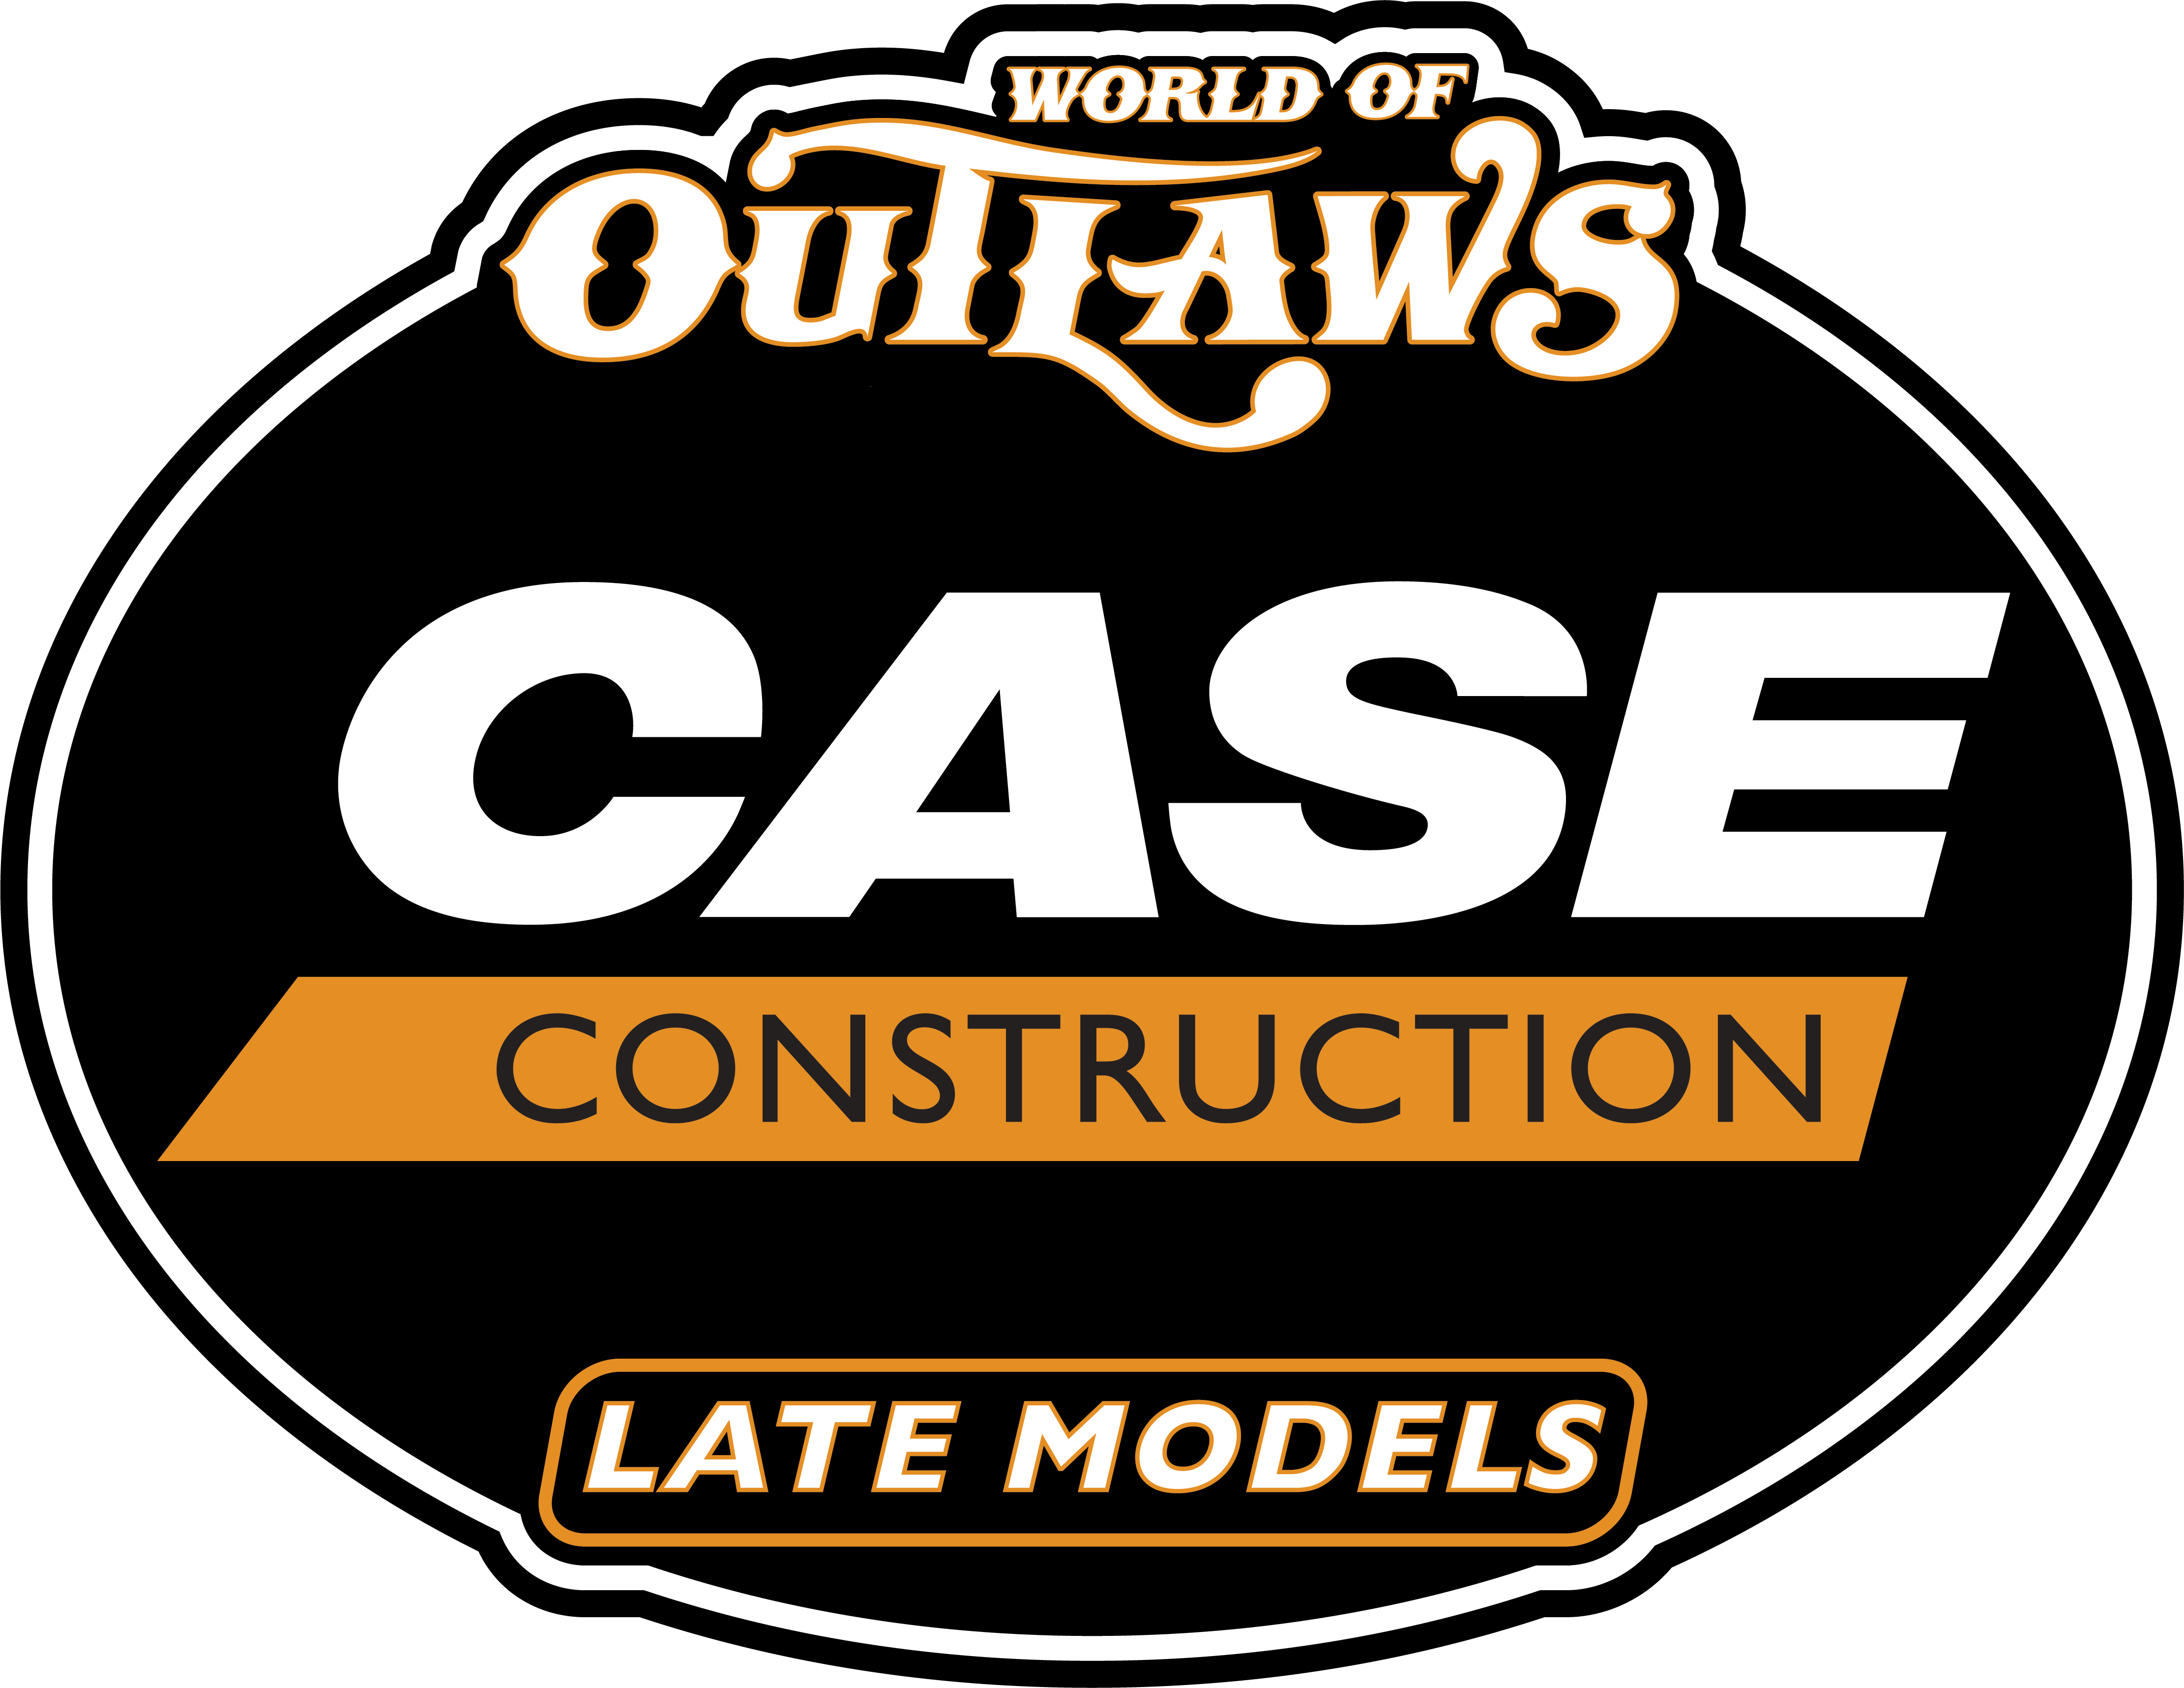 World of Outlaws CASE Late Models